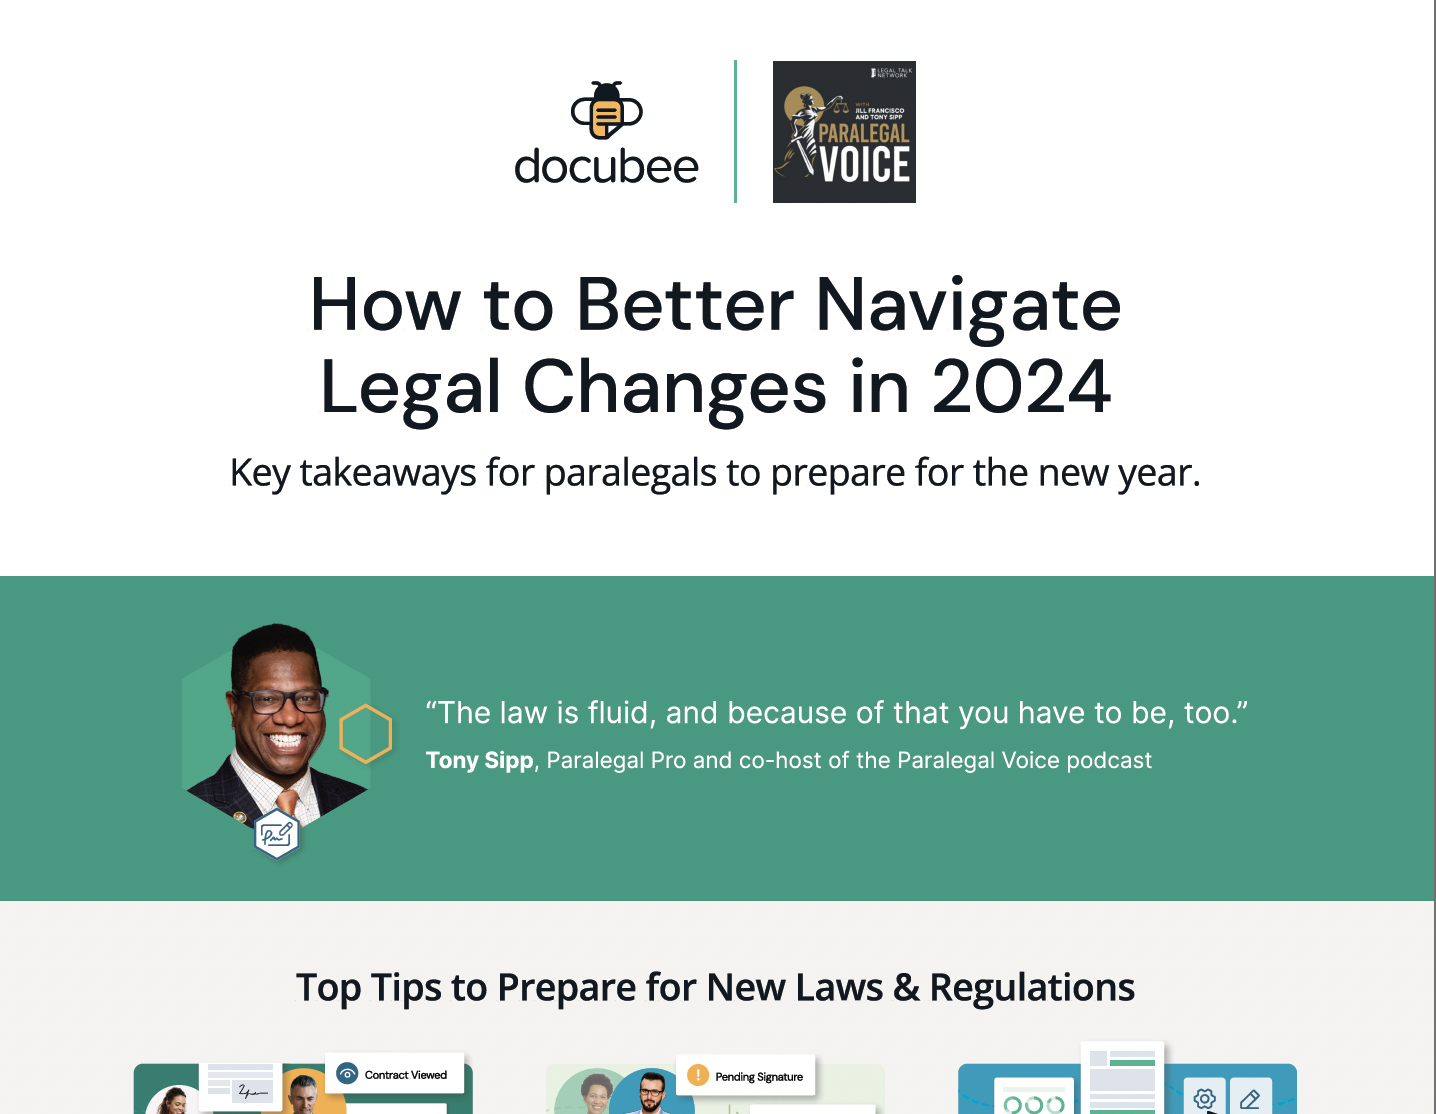 How to Better Navigate Legal Changes in 2024 Infographic